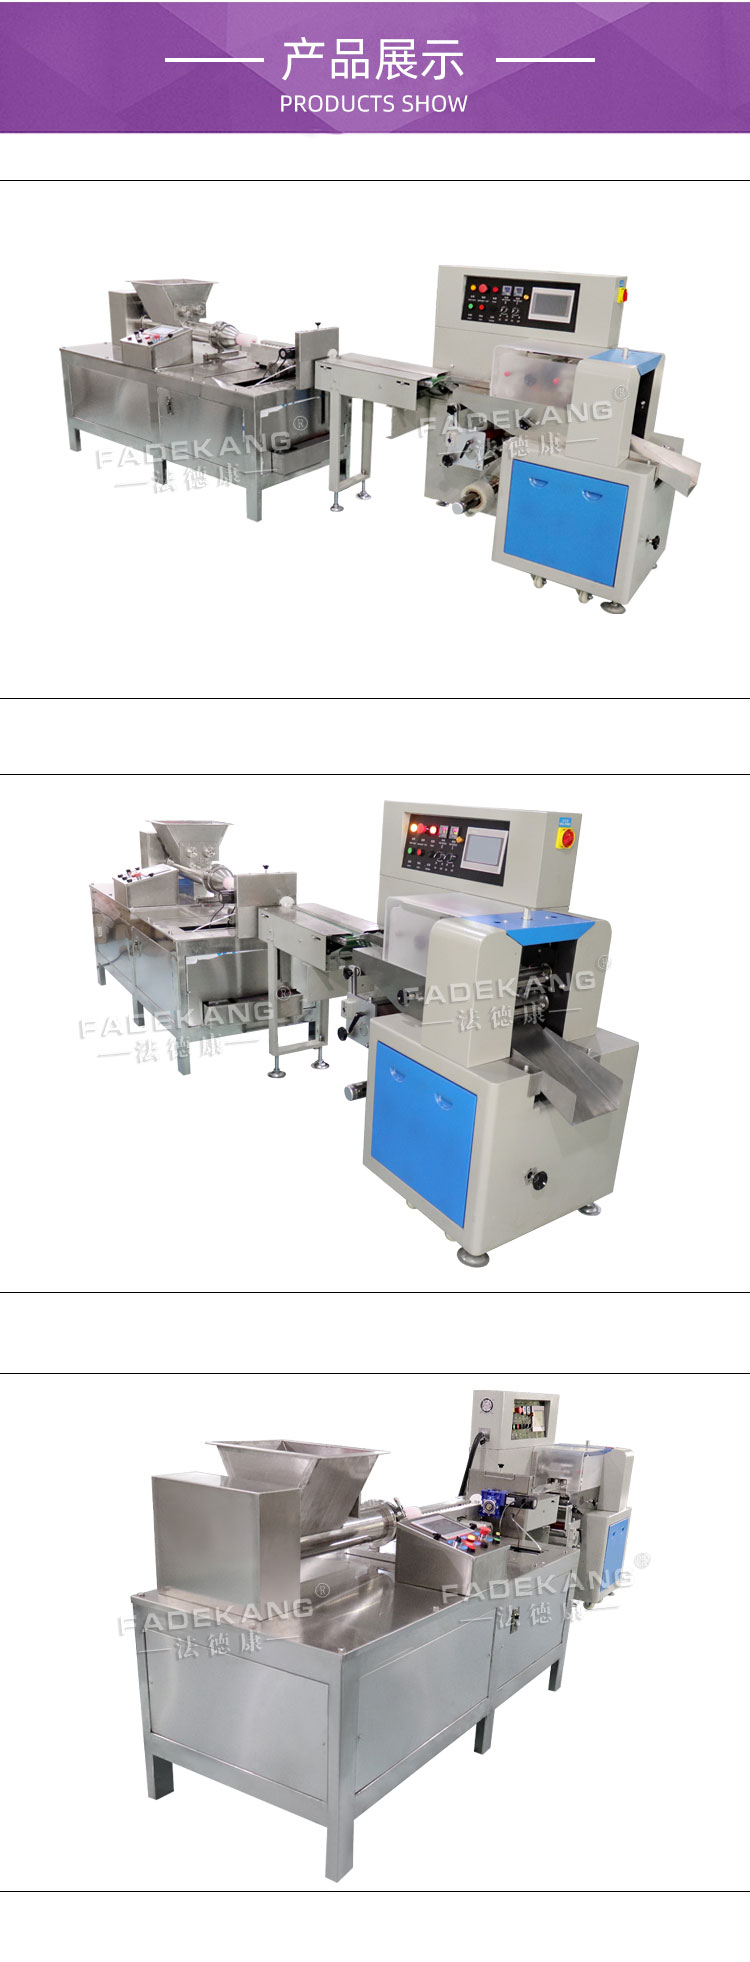 Full automatic color mud, space mud, powder mud packaging machine, Plasticine bag sealing machine, ultra light soiling extruder